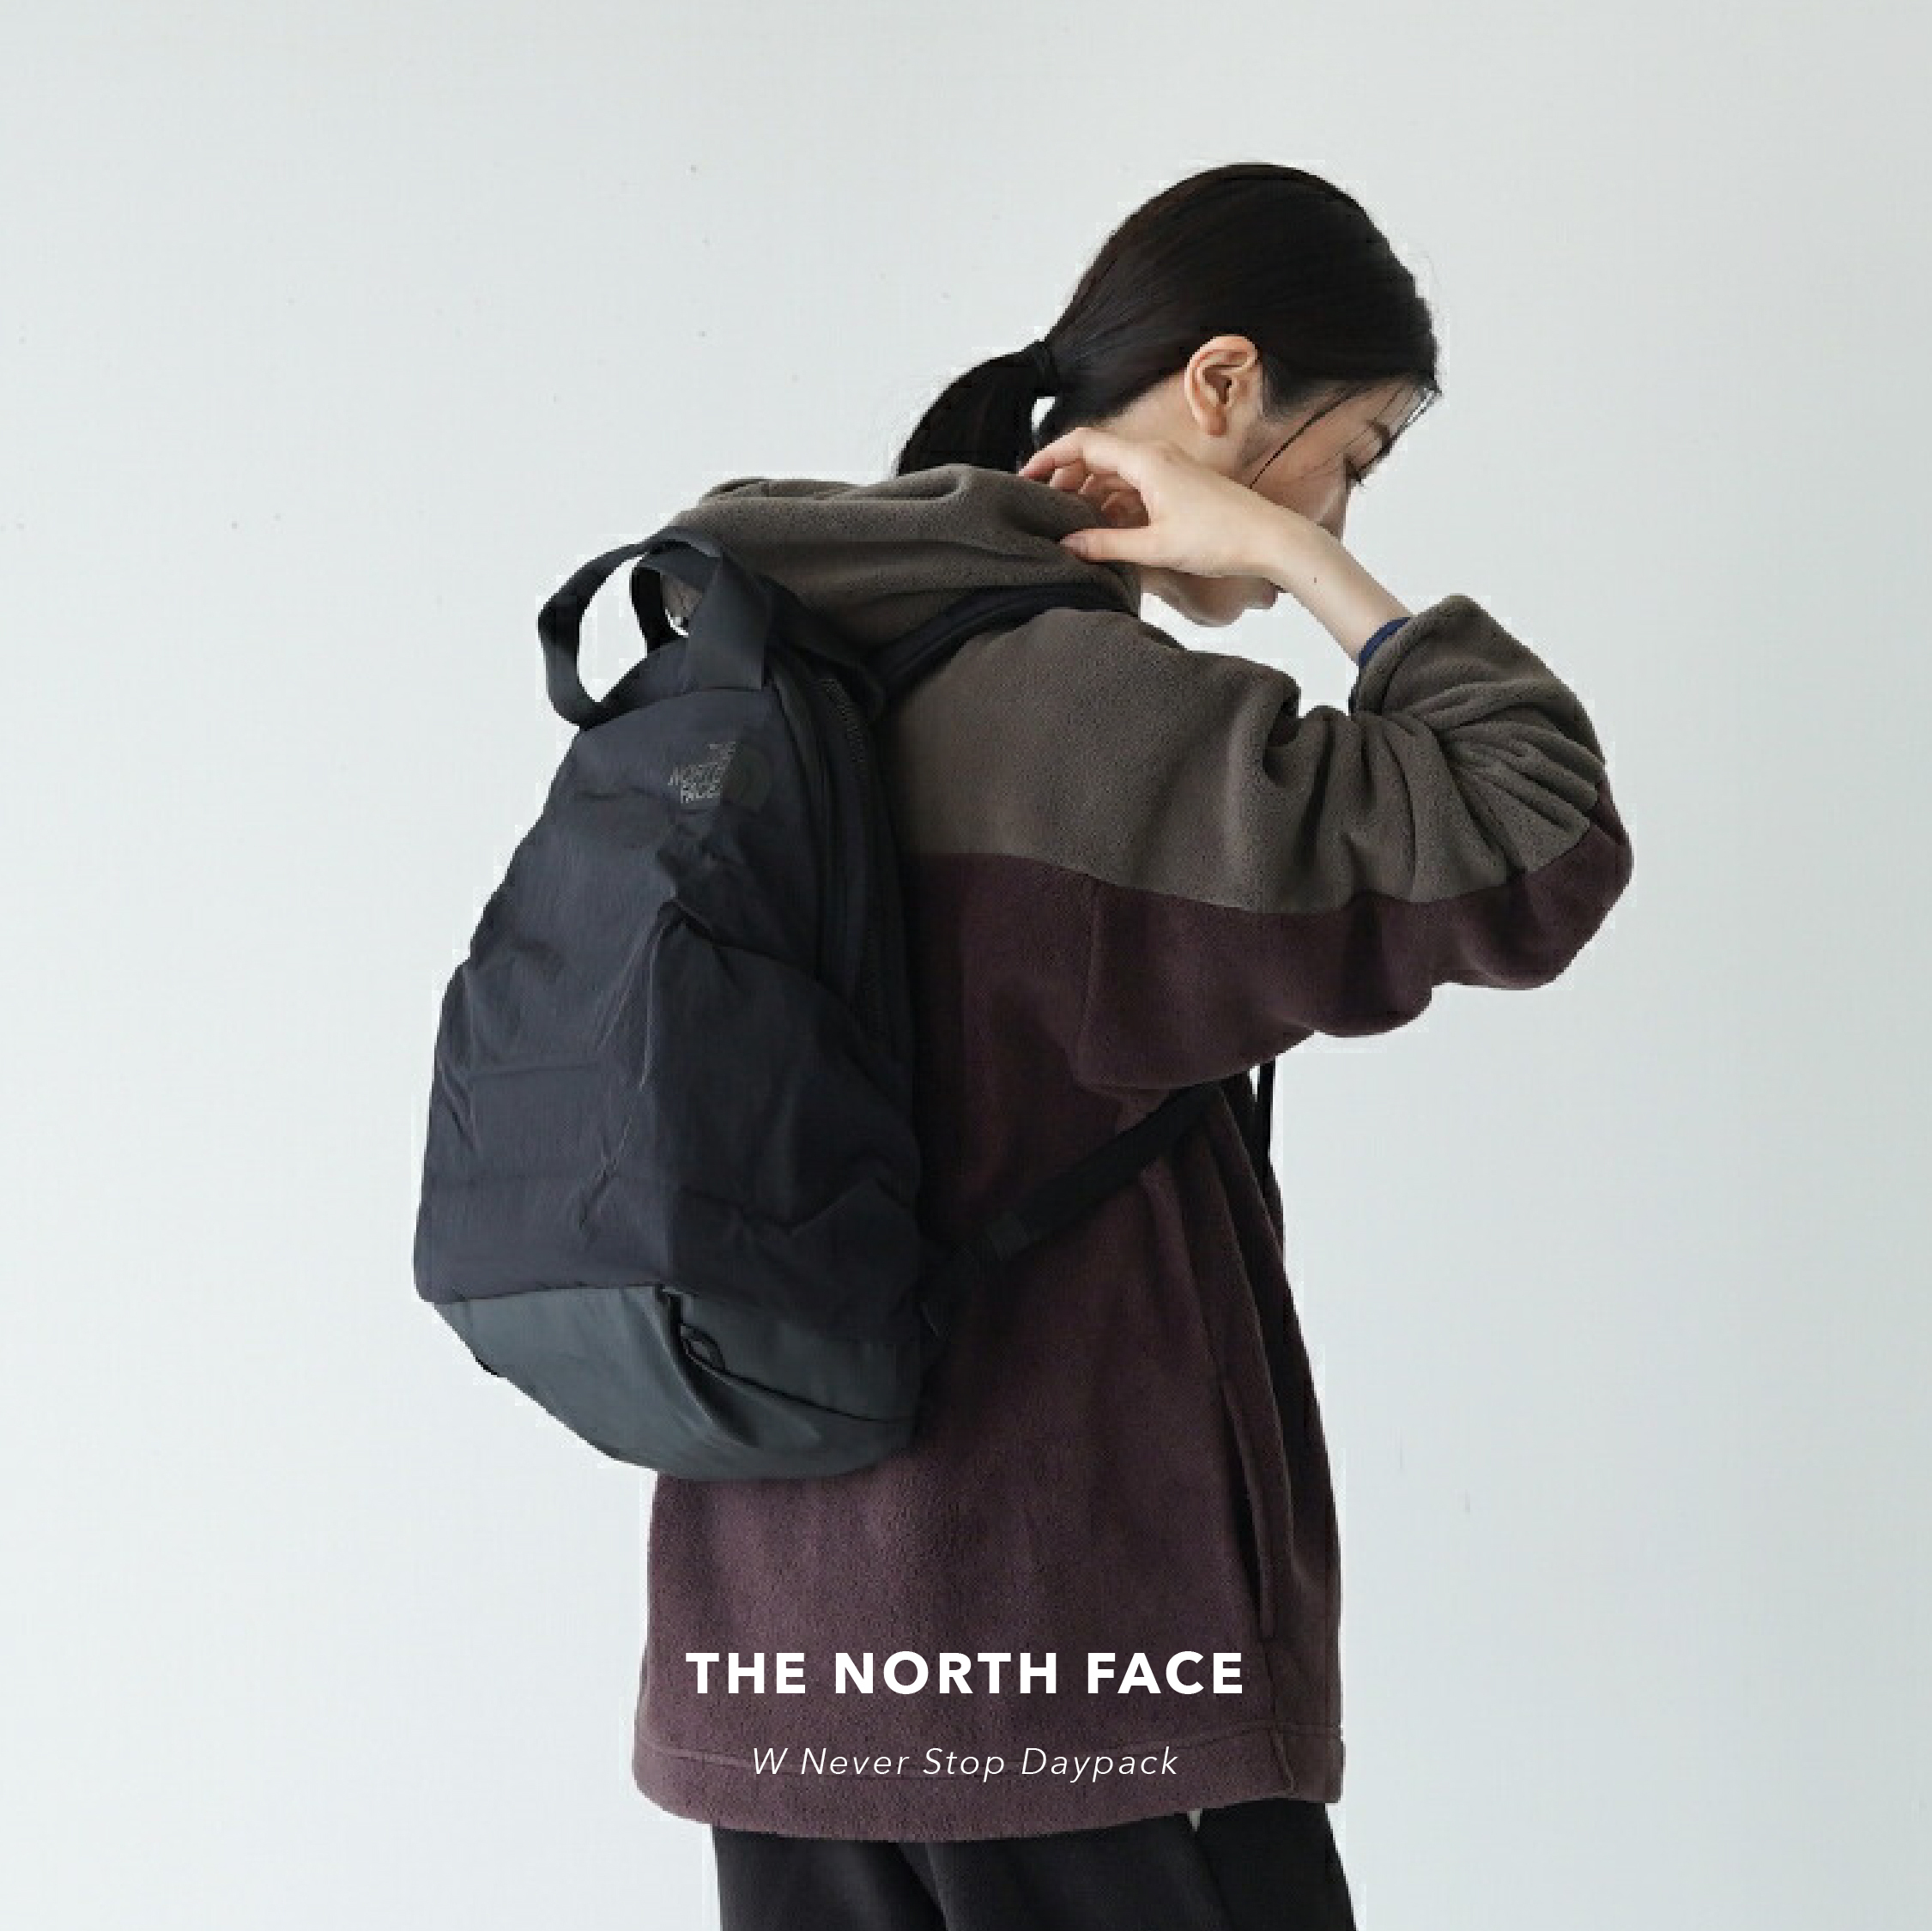 SANXI_商品圖｜TNF_THE NORTH FACE W Never Stop Daypack